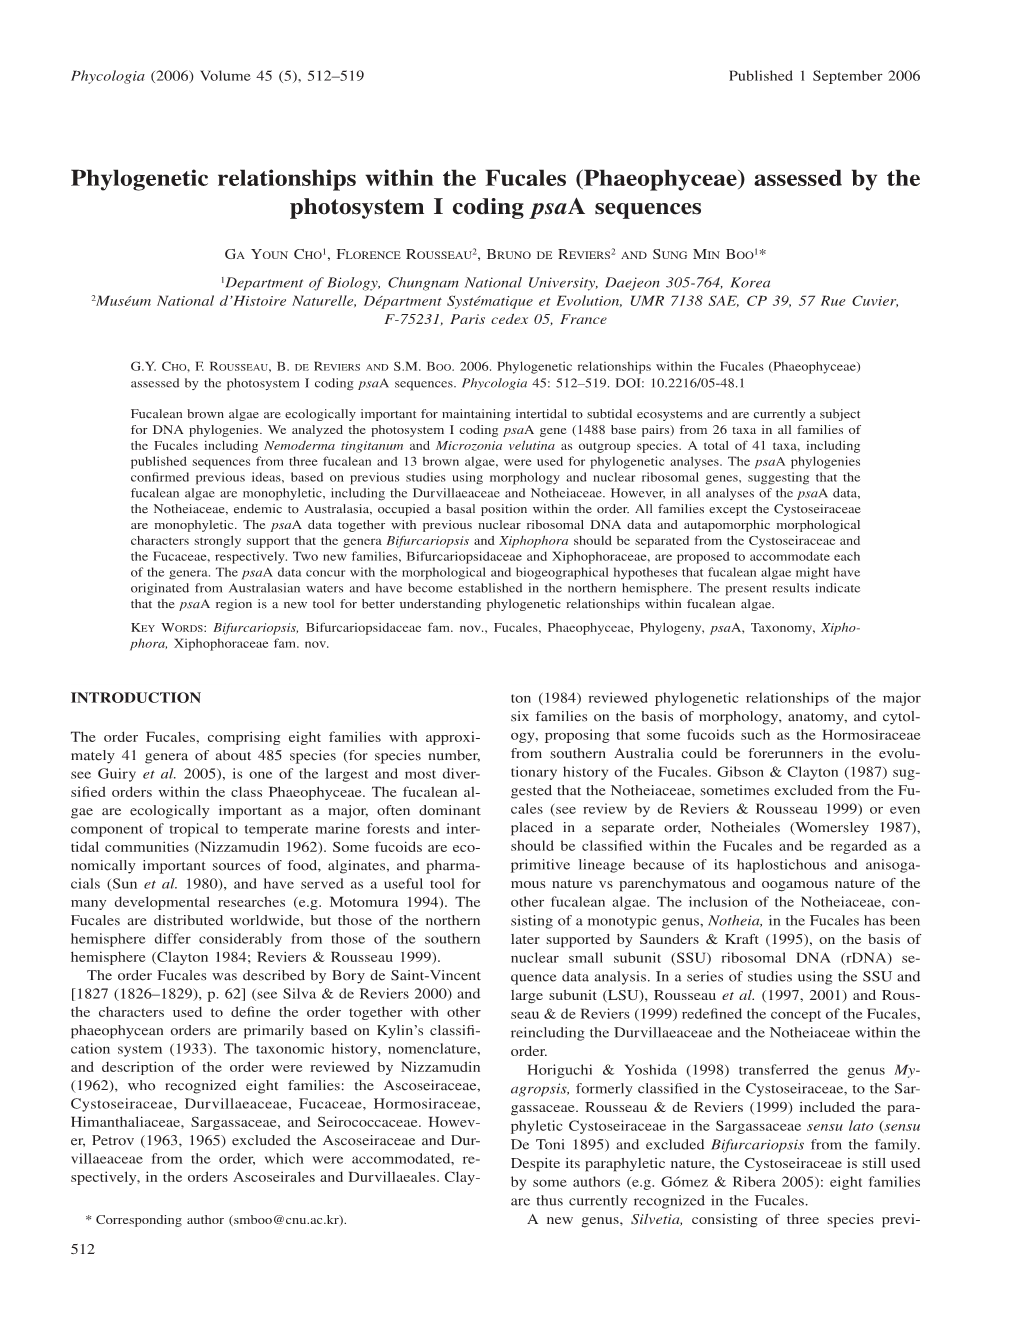 Phylogenetic Relationships Within the Fucales (Phaeophyceae) Assessed by the Photosystem I Coding Psaa Sequences